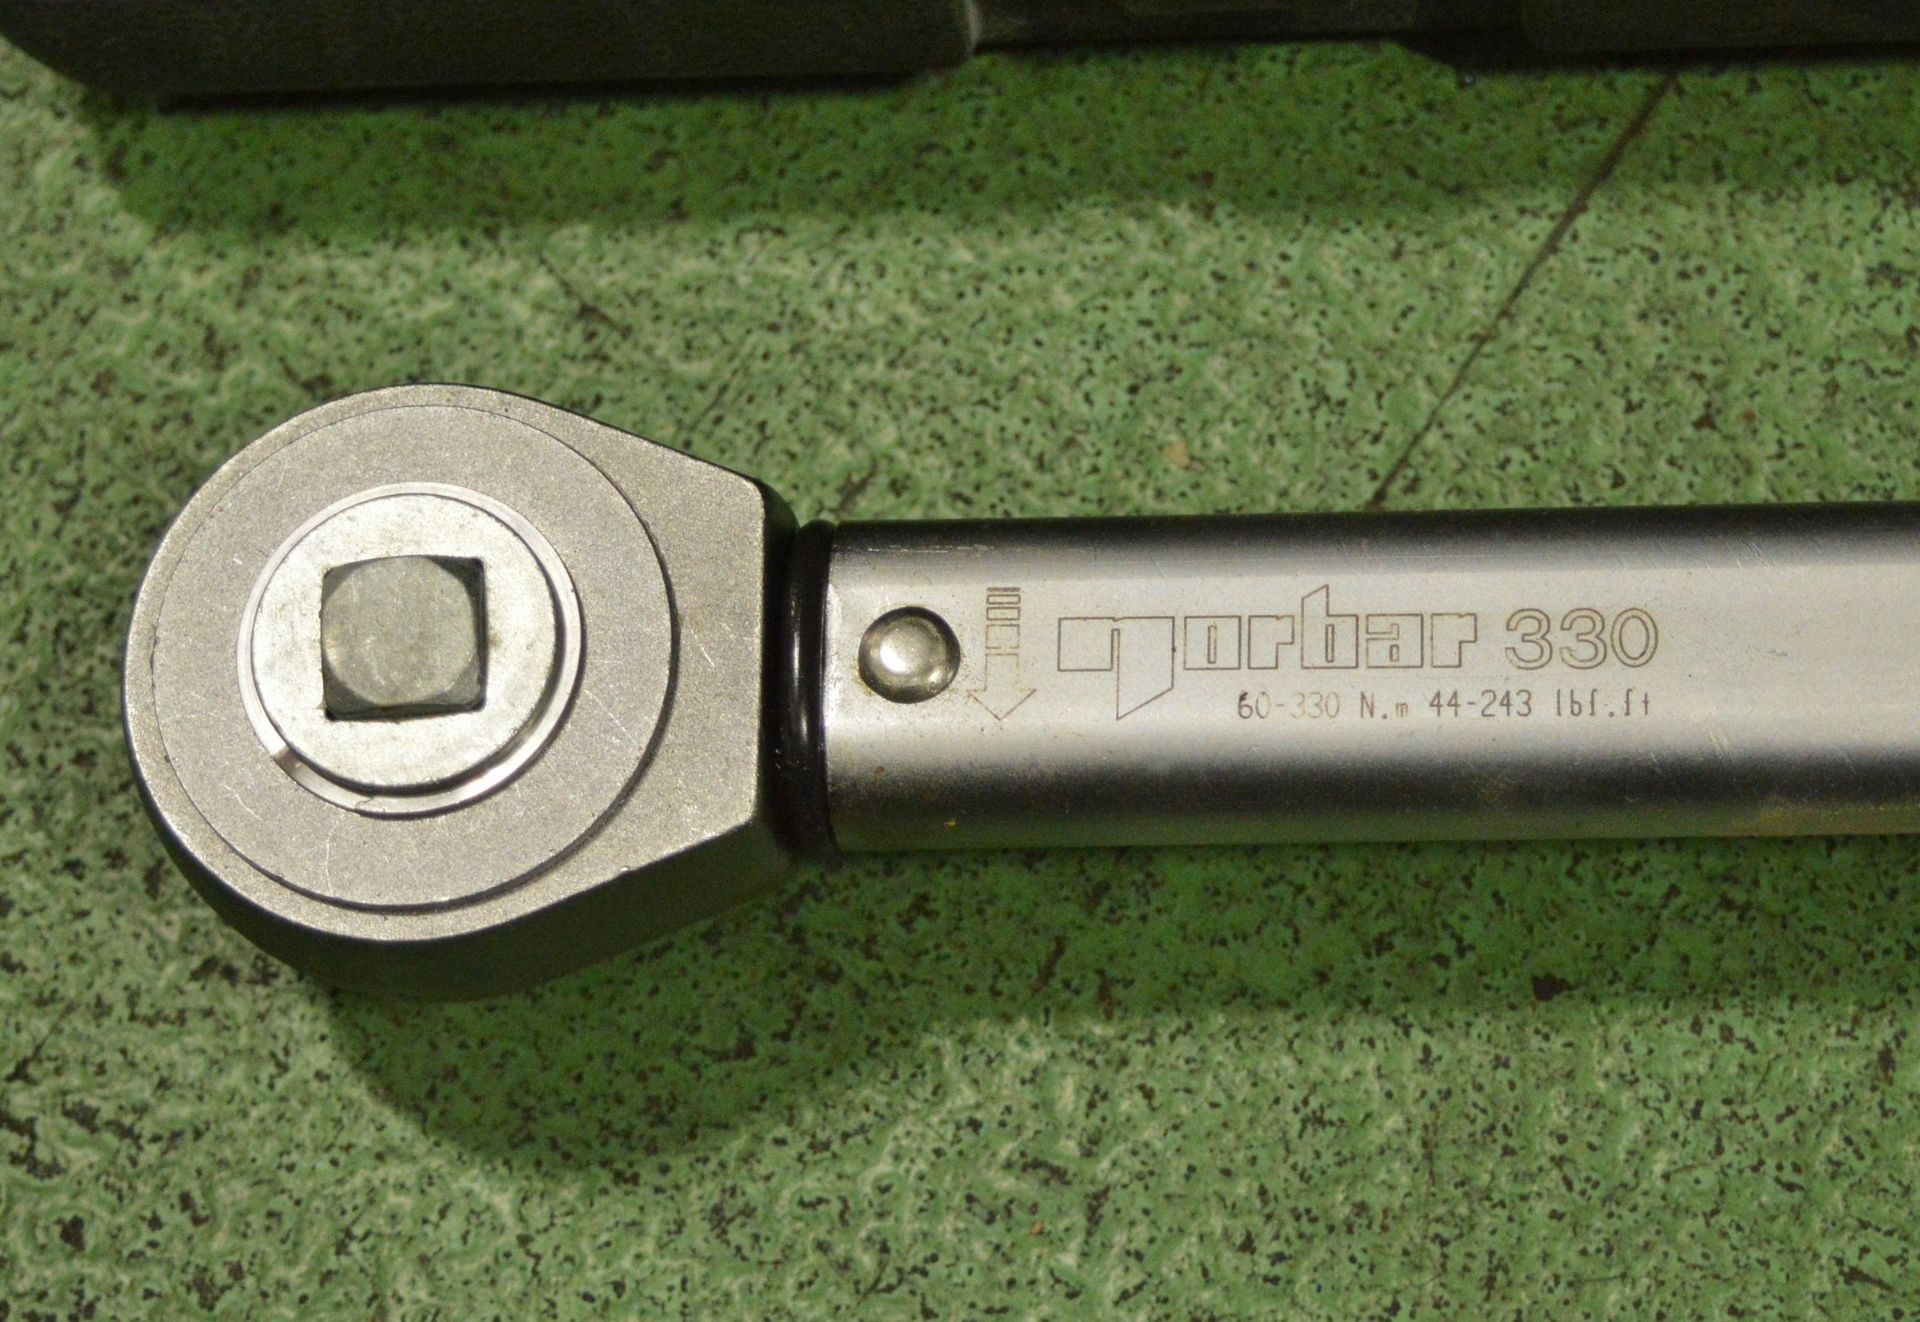 Norbar 330 Torque Wrench 45-250 ibf ft - Image 2 of 2